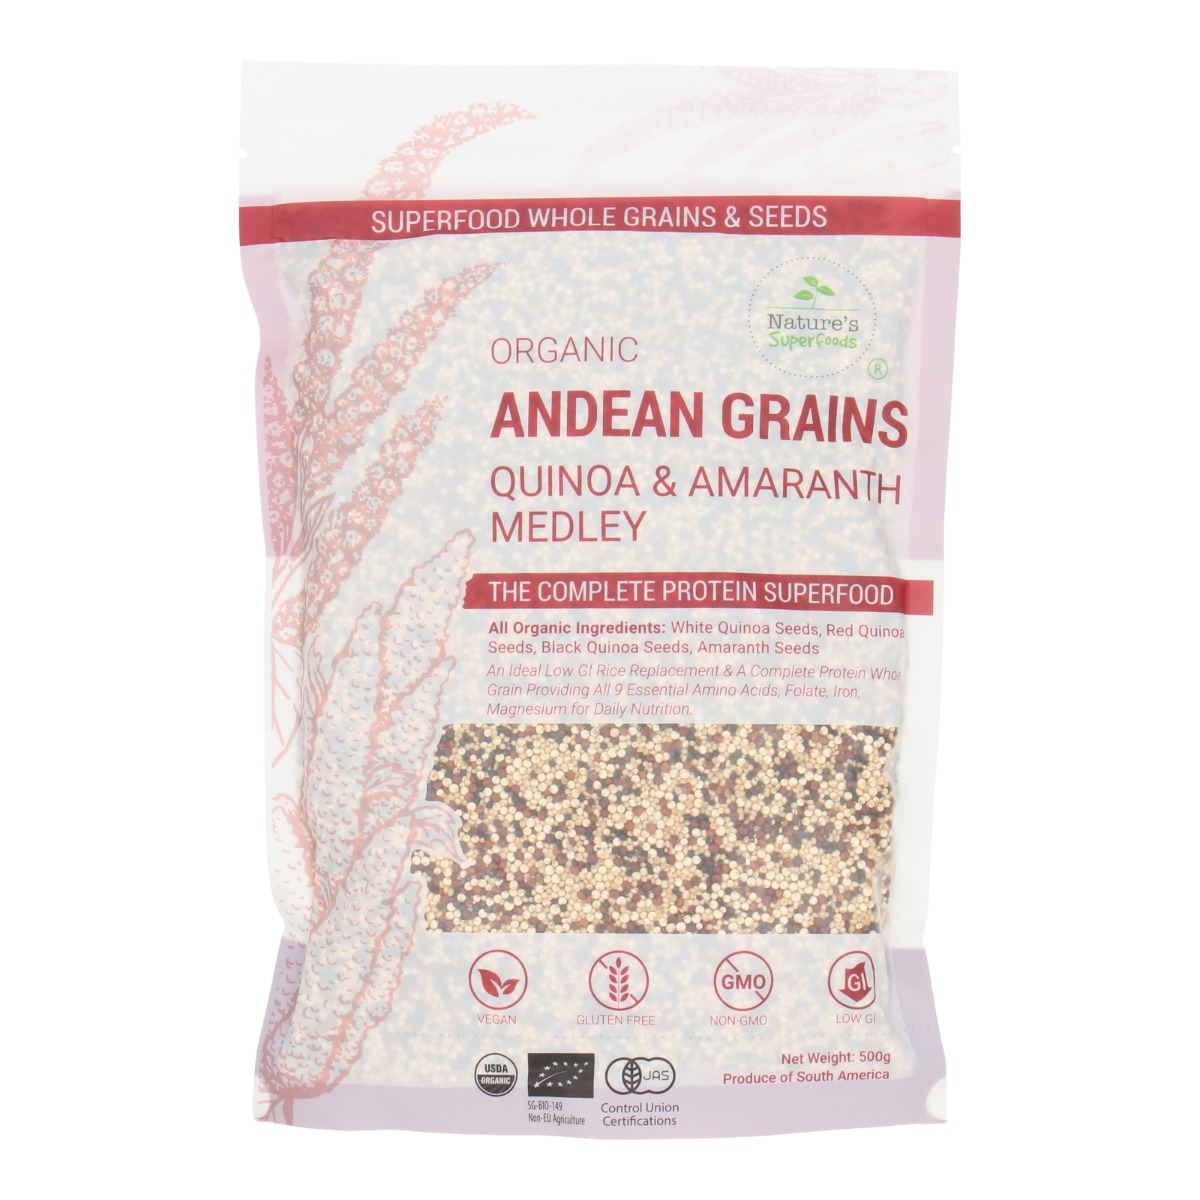 Organic Quinoa & Amaranth (Andean Grains Medley)-500g resealable pack front